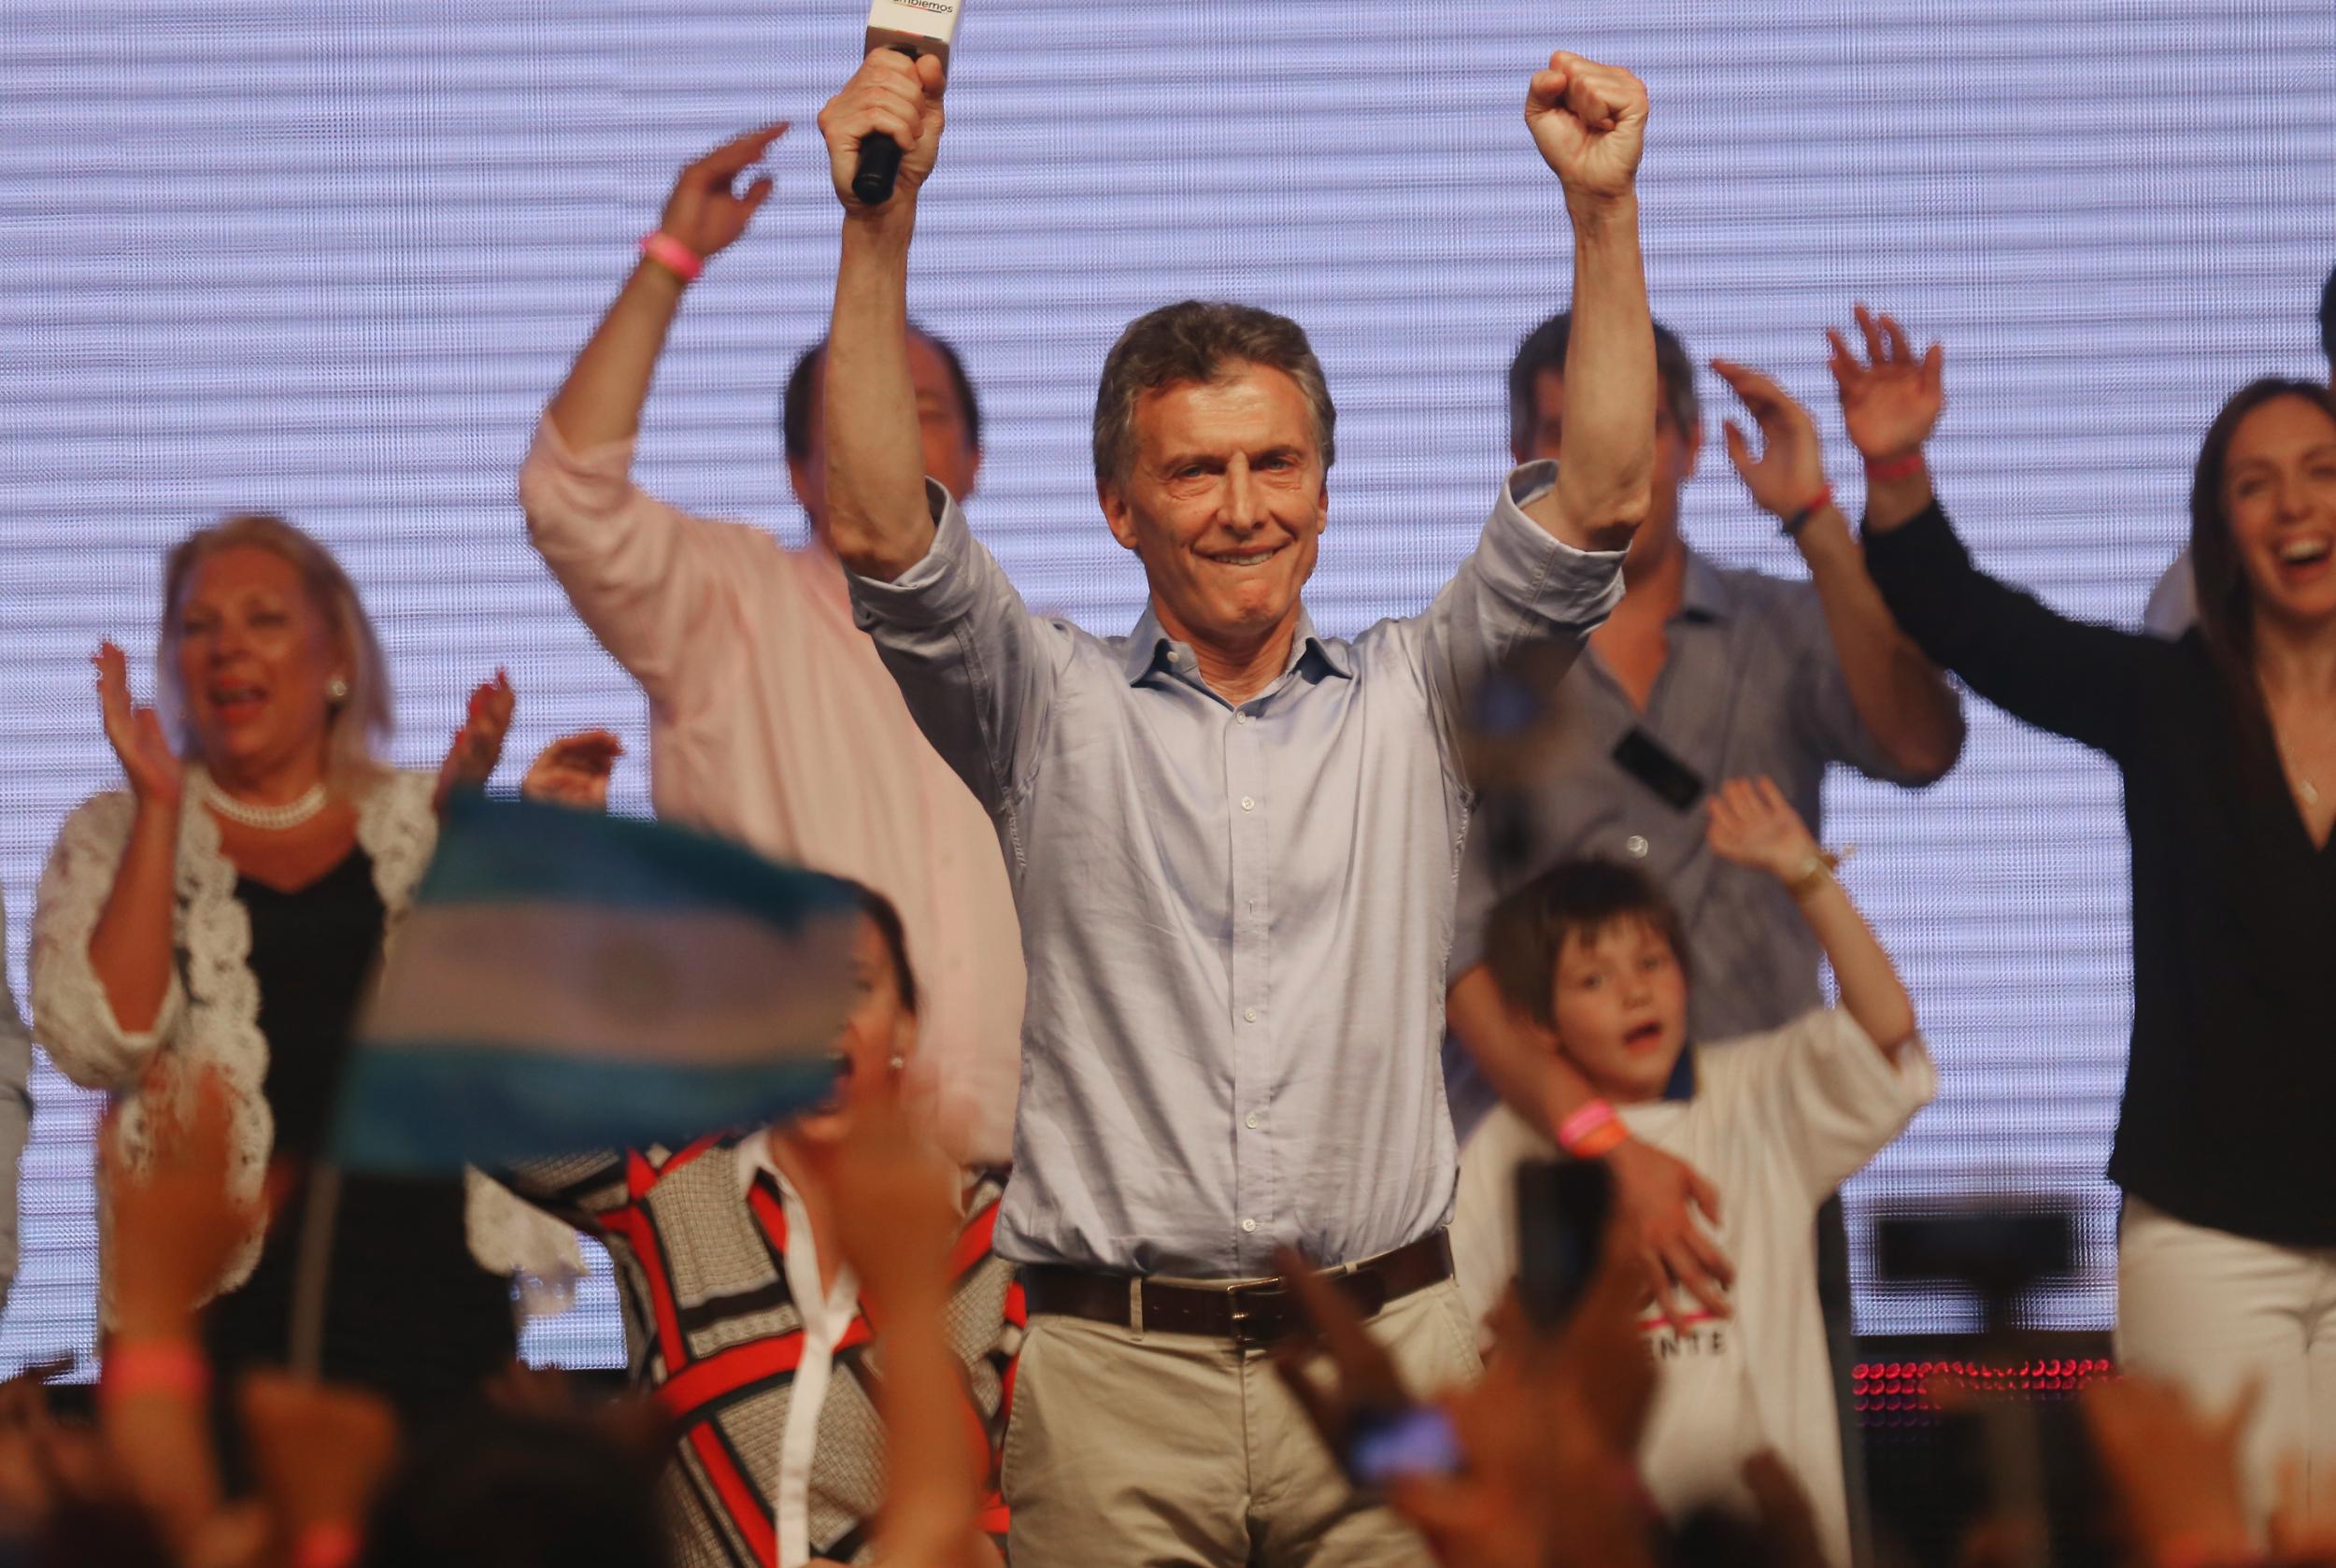 Opposition presidential candidate Mauricio Macri celebrates after defeating ruling party candidate Daniel Scioli